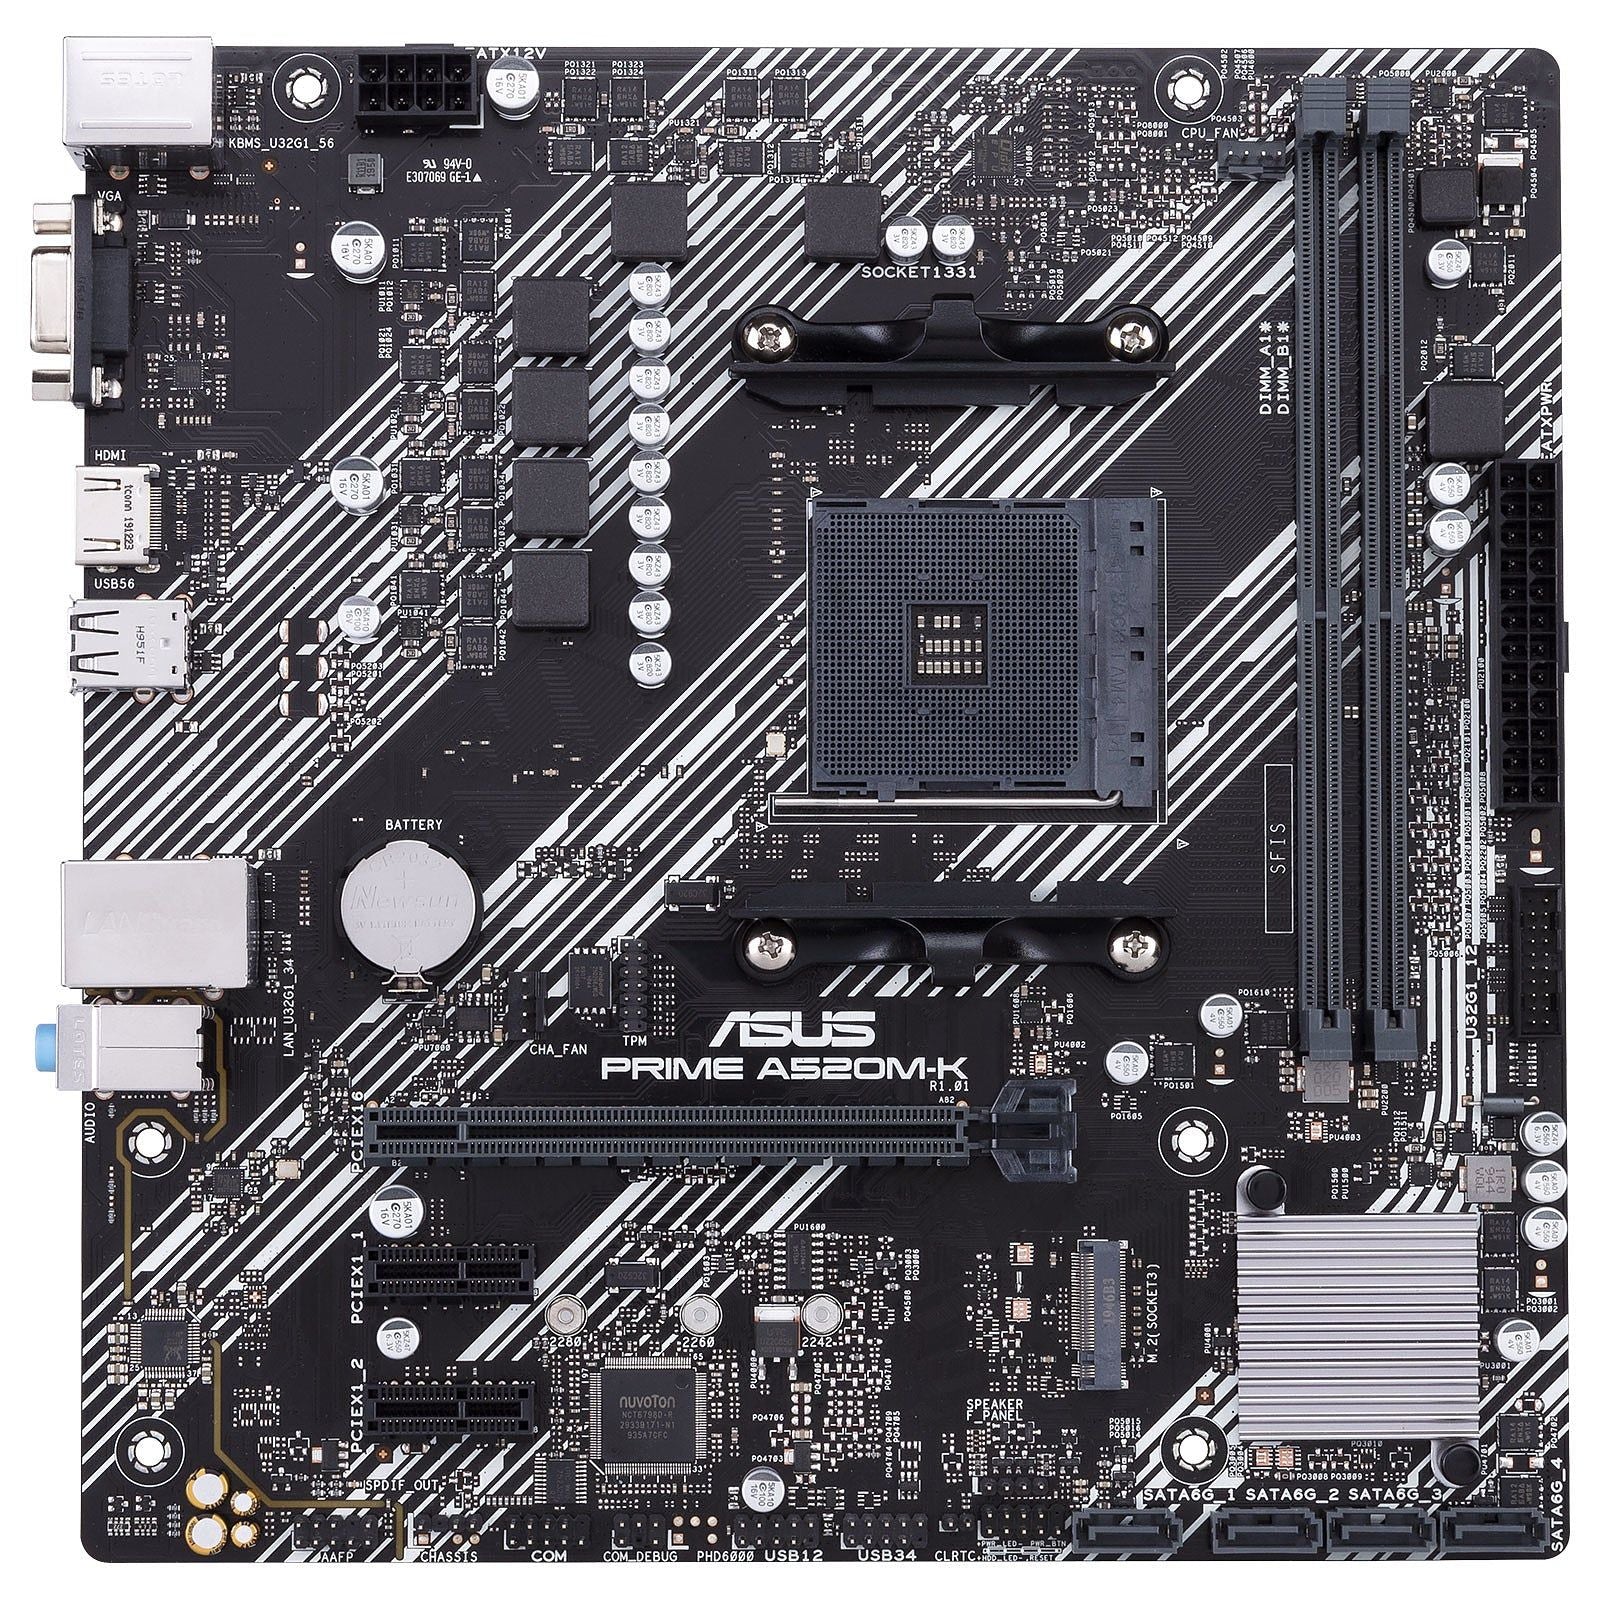 ASUS PRIME A520M-K - OVERCLOCK Computer